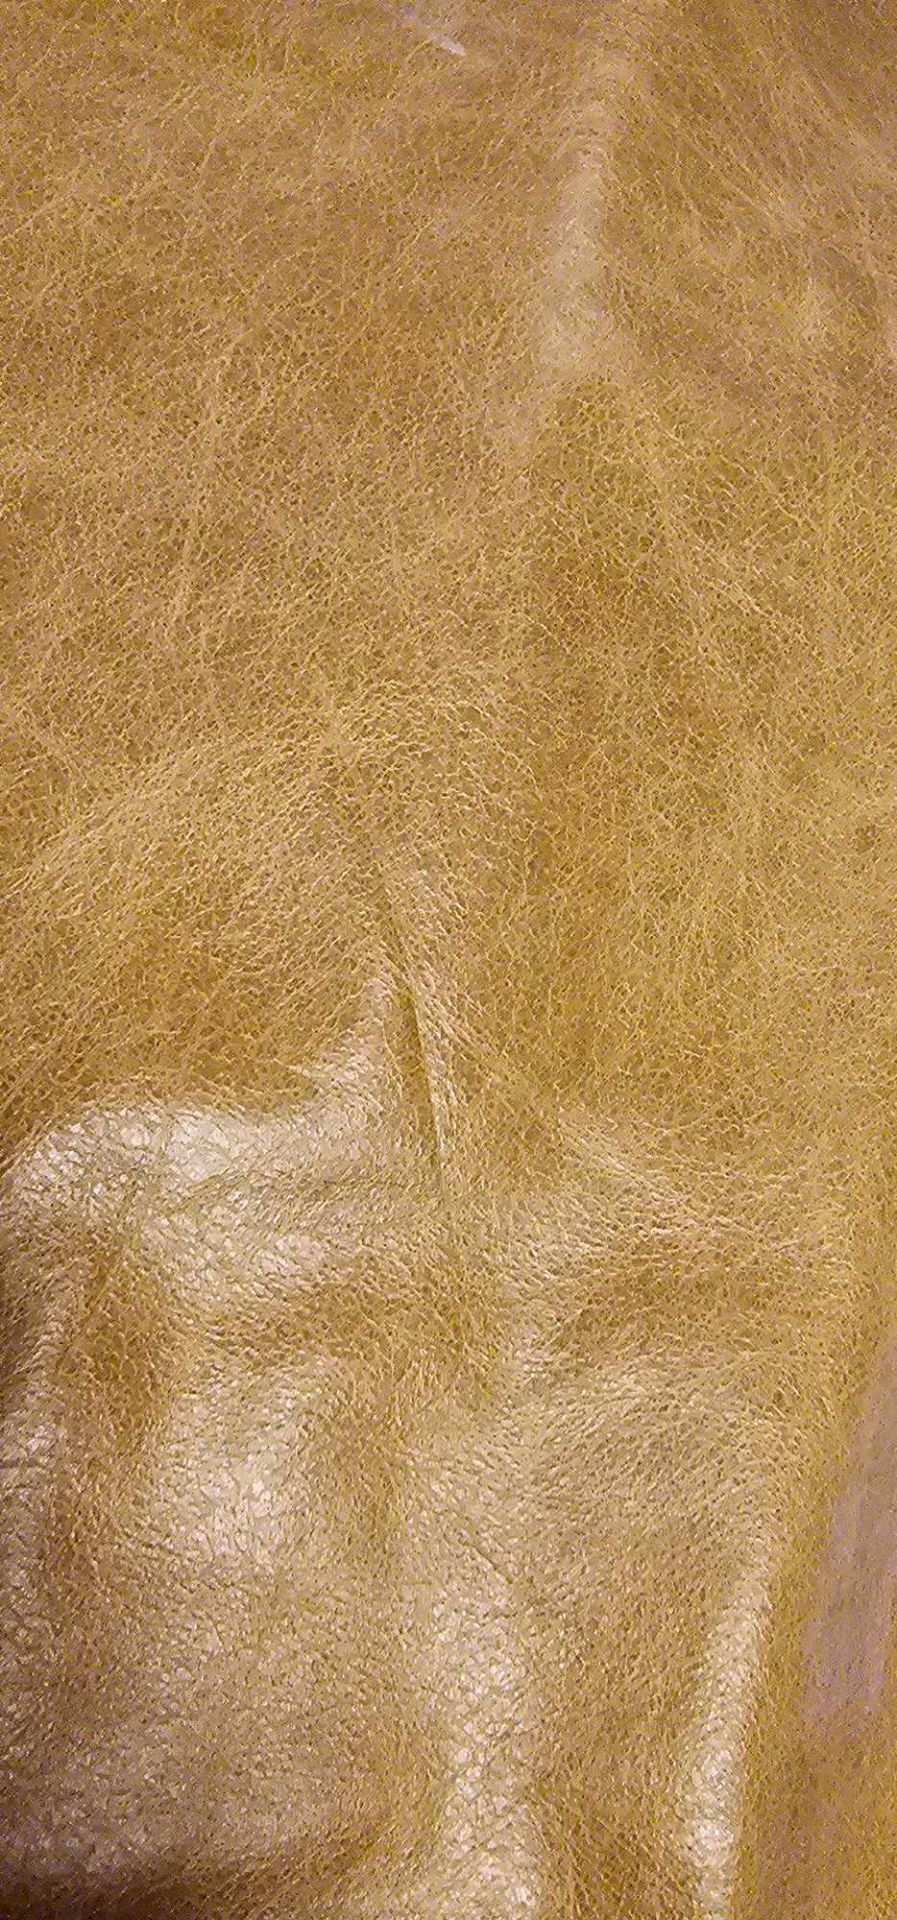 Yarwood Leather Cow Hide Oregon Ash Approx. 2.31m2 - Image 3 of 7